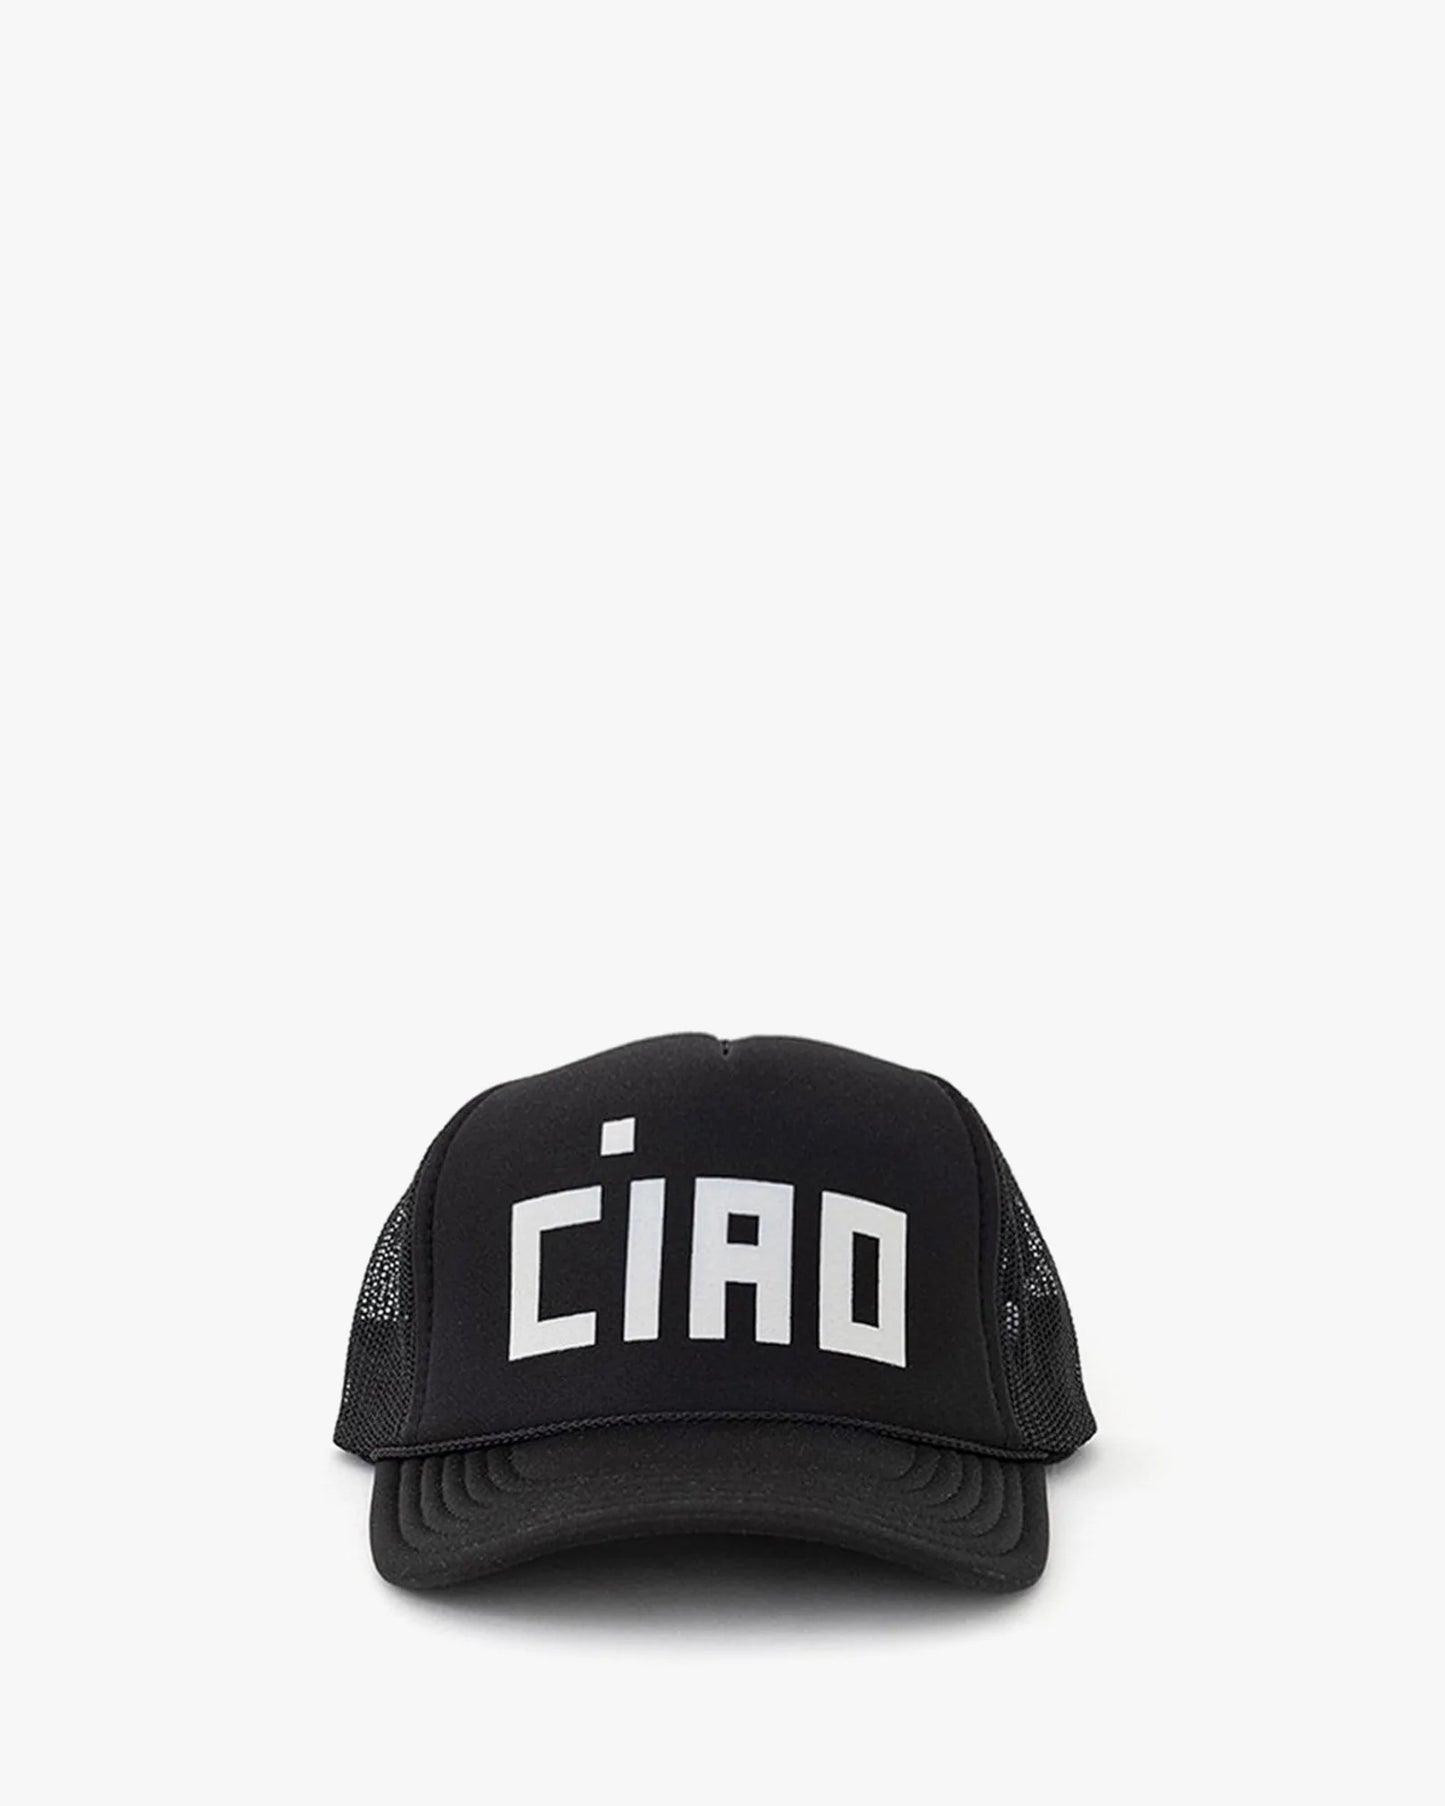 Clare V Trucker Hat Block Ciao, Multiple Options